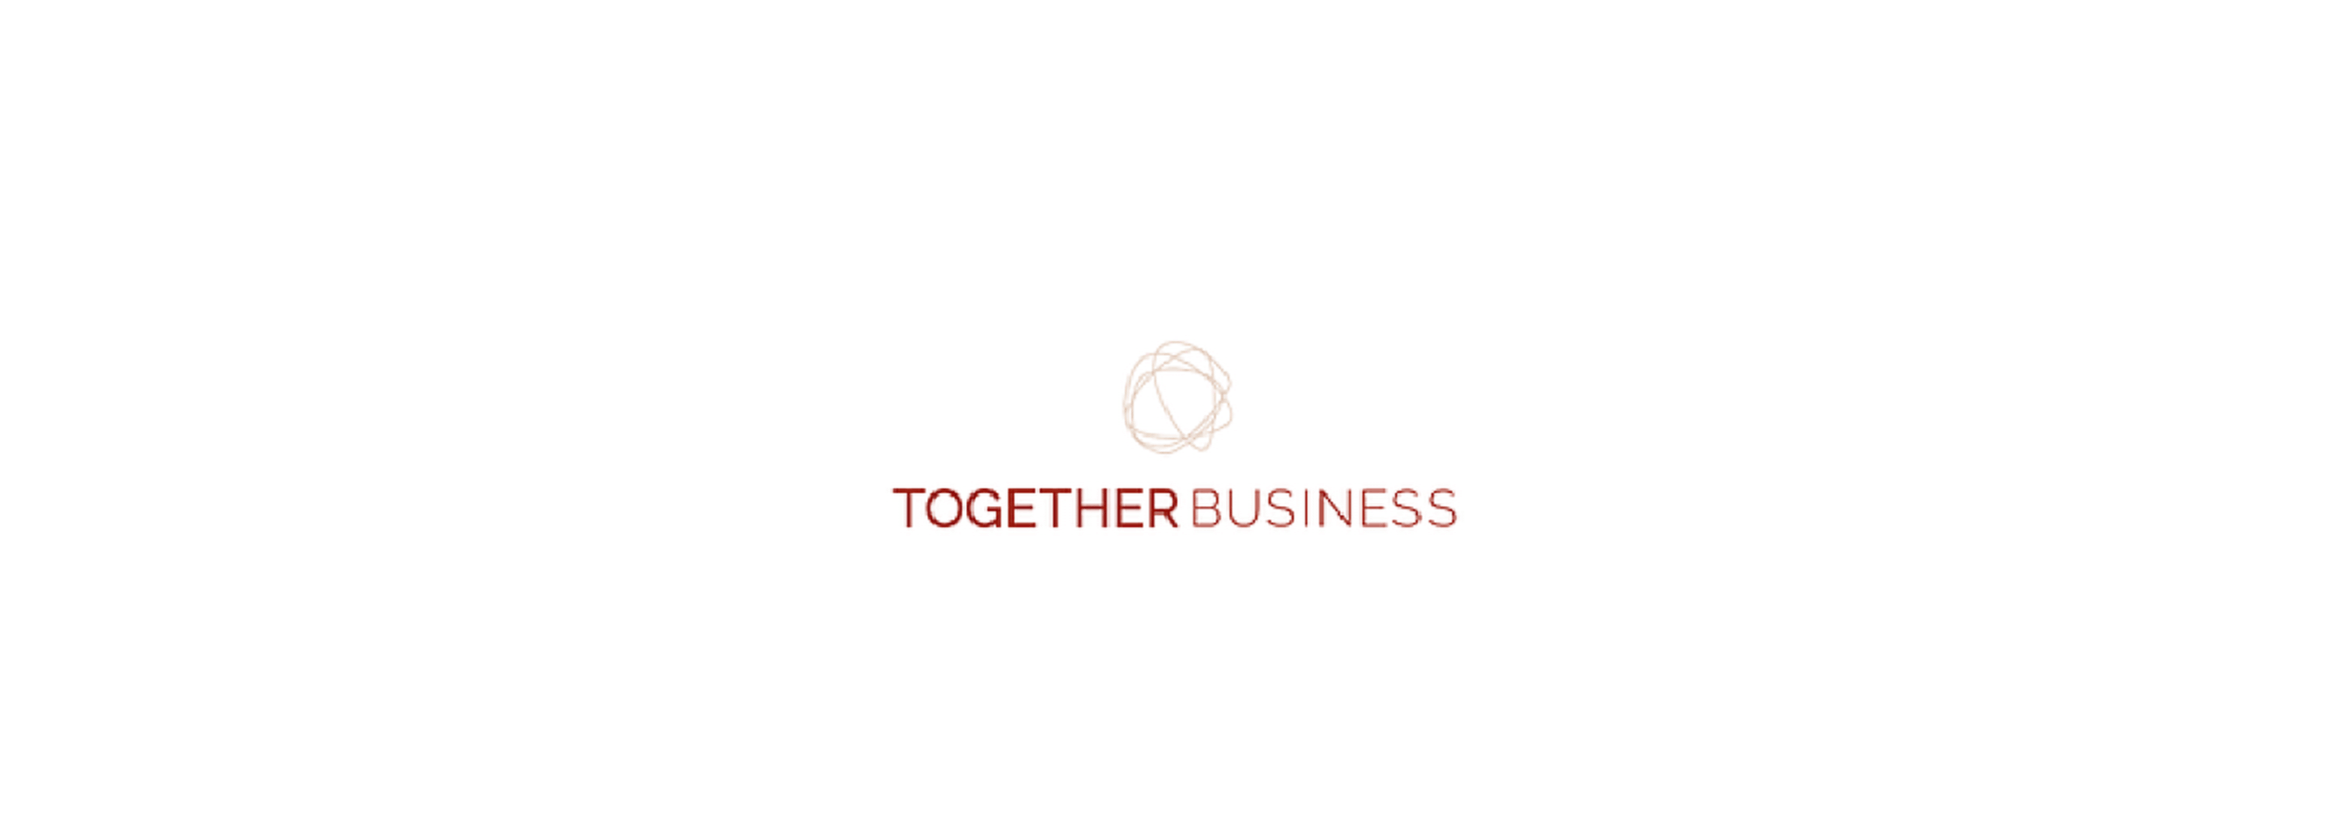 The logo of Together Business